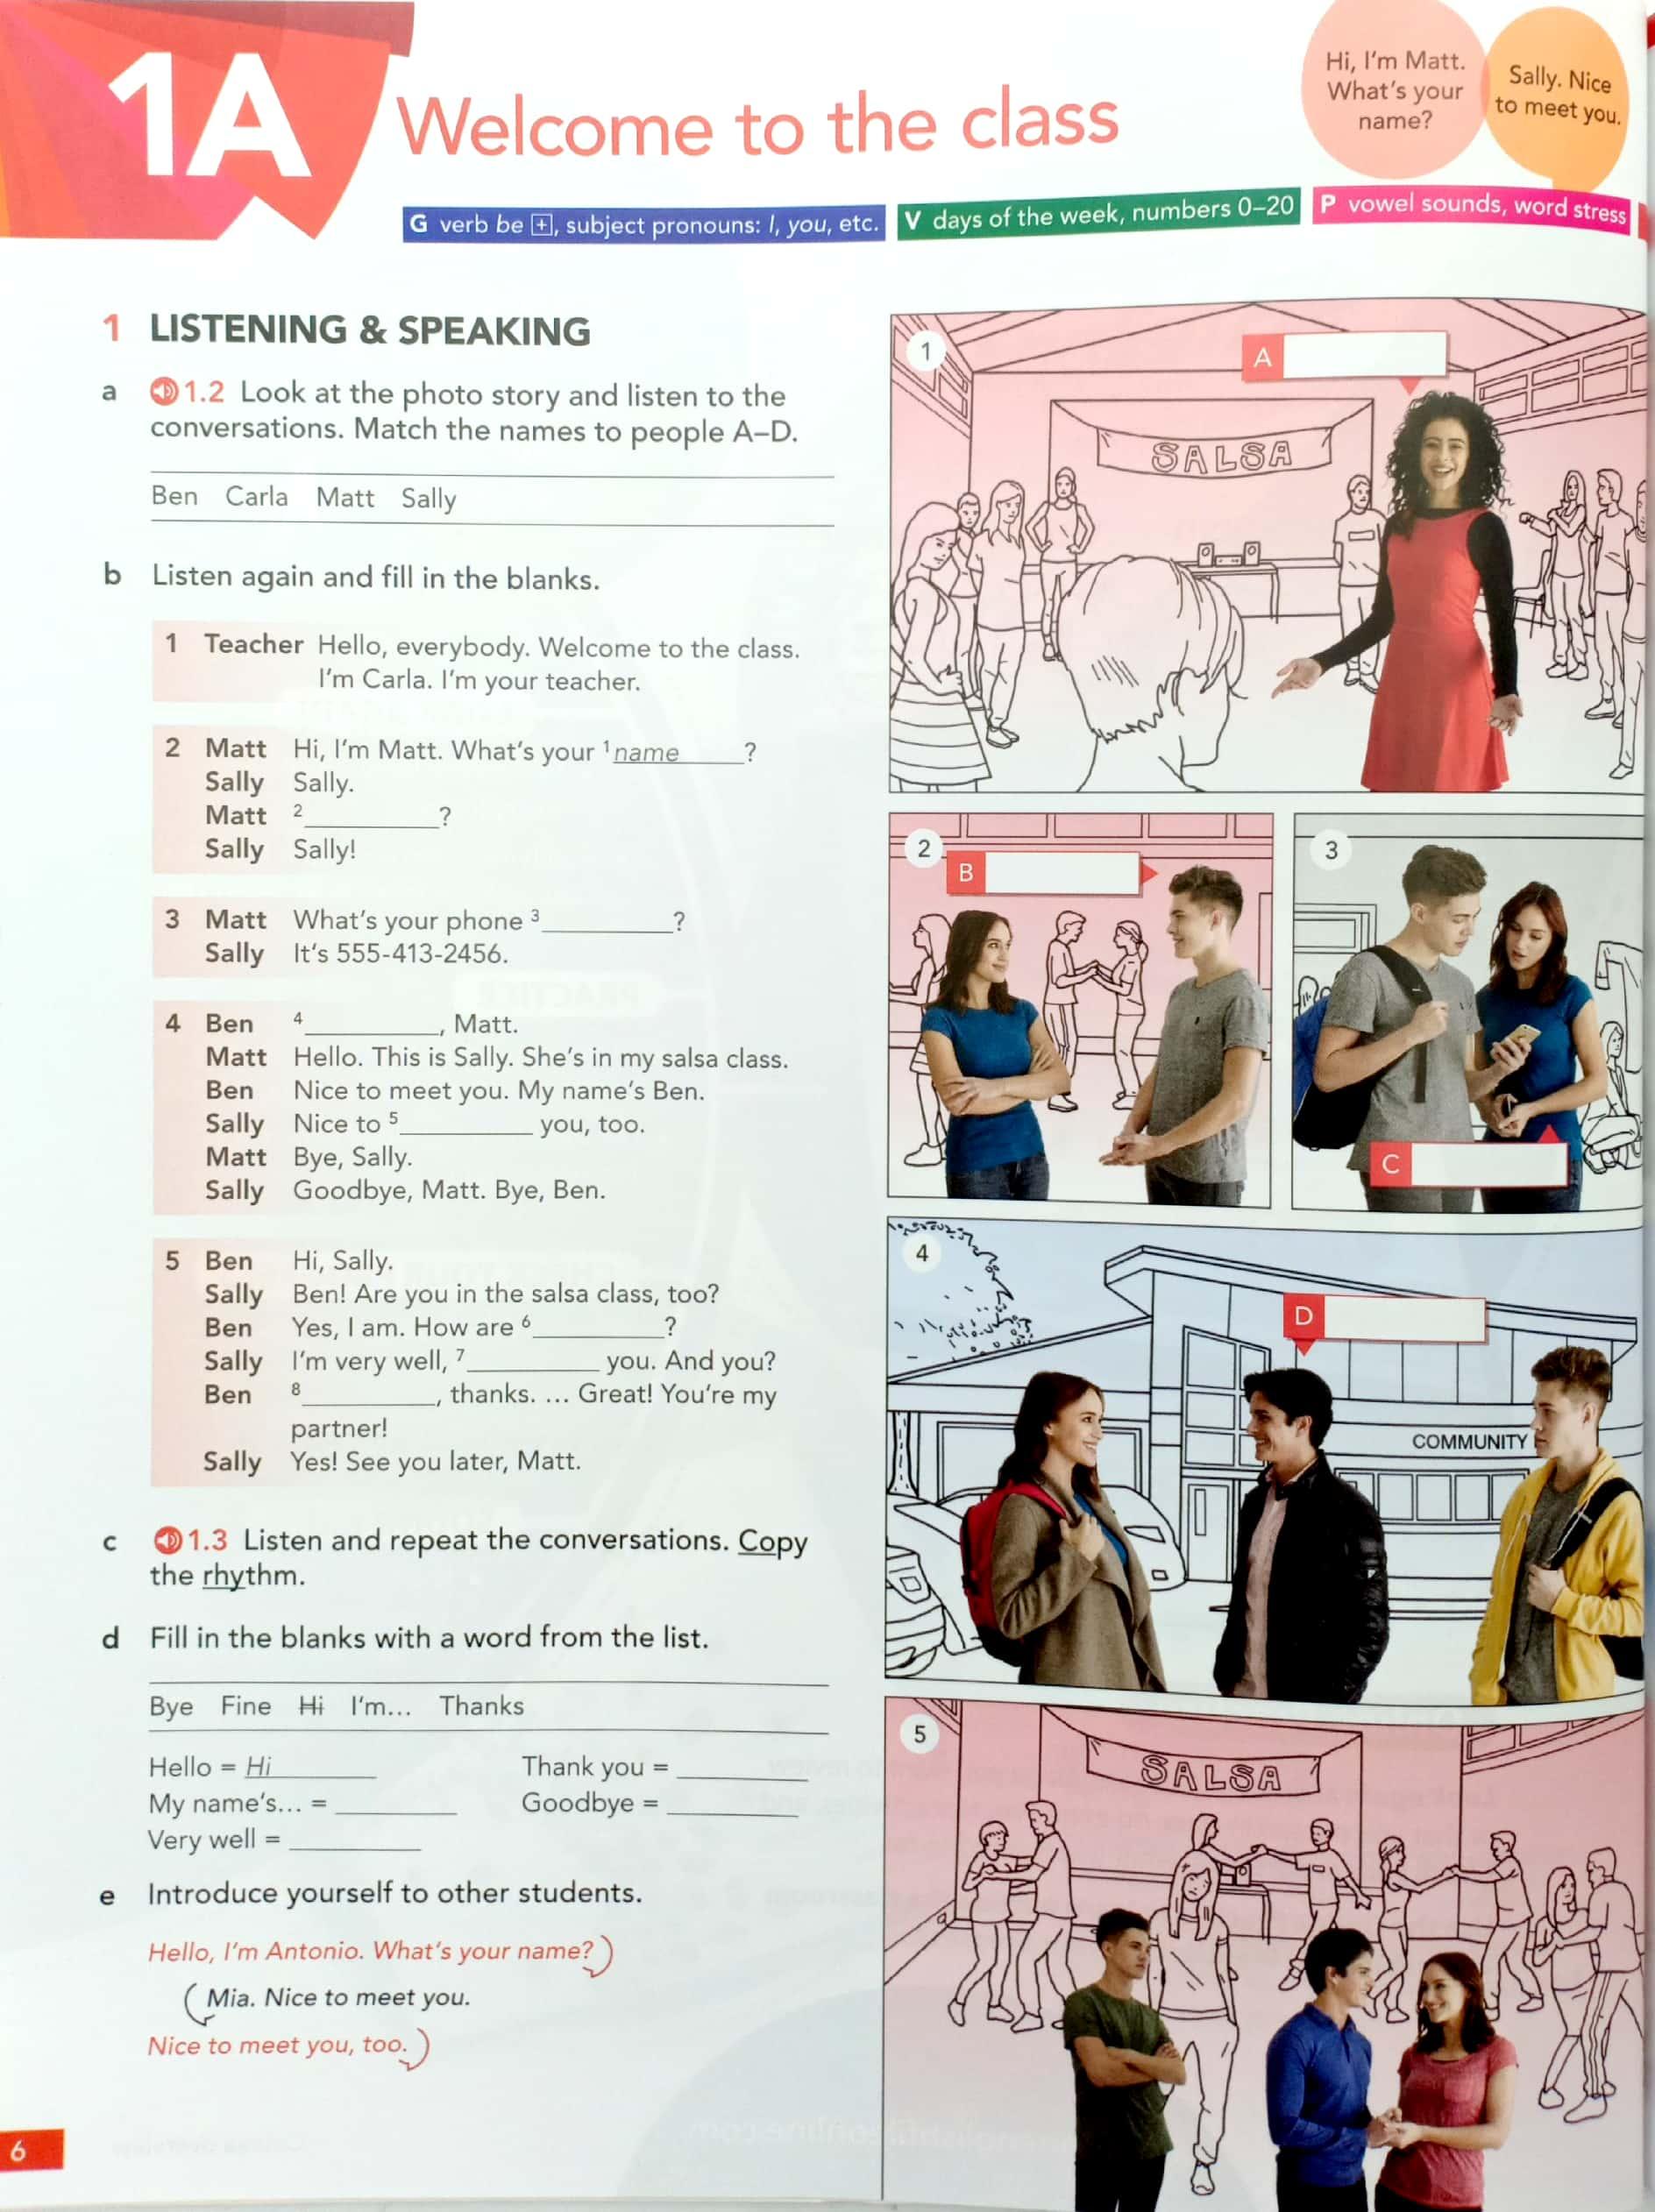 Hình ảnh American English File: Level 1: Students Book With Online Practice - 3rd Edition